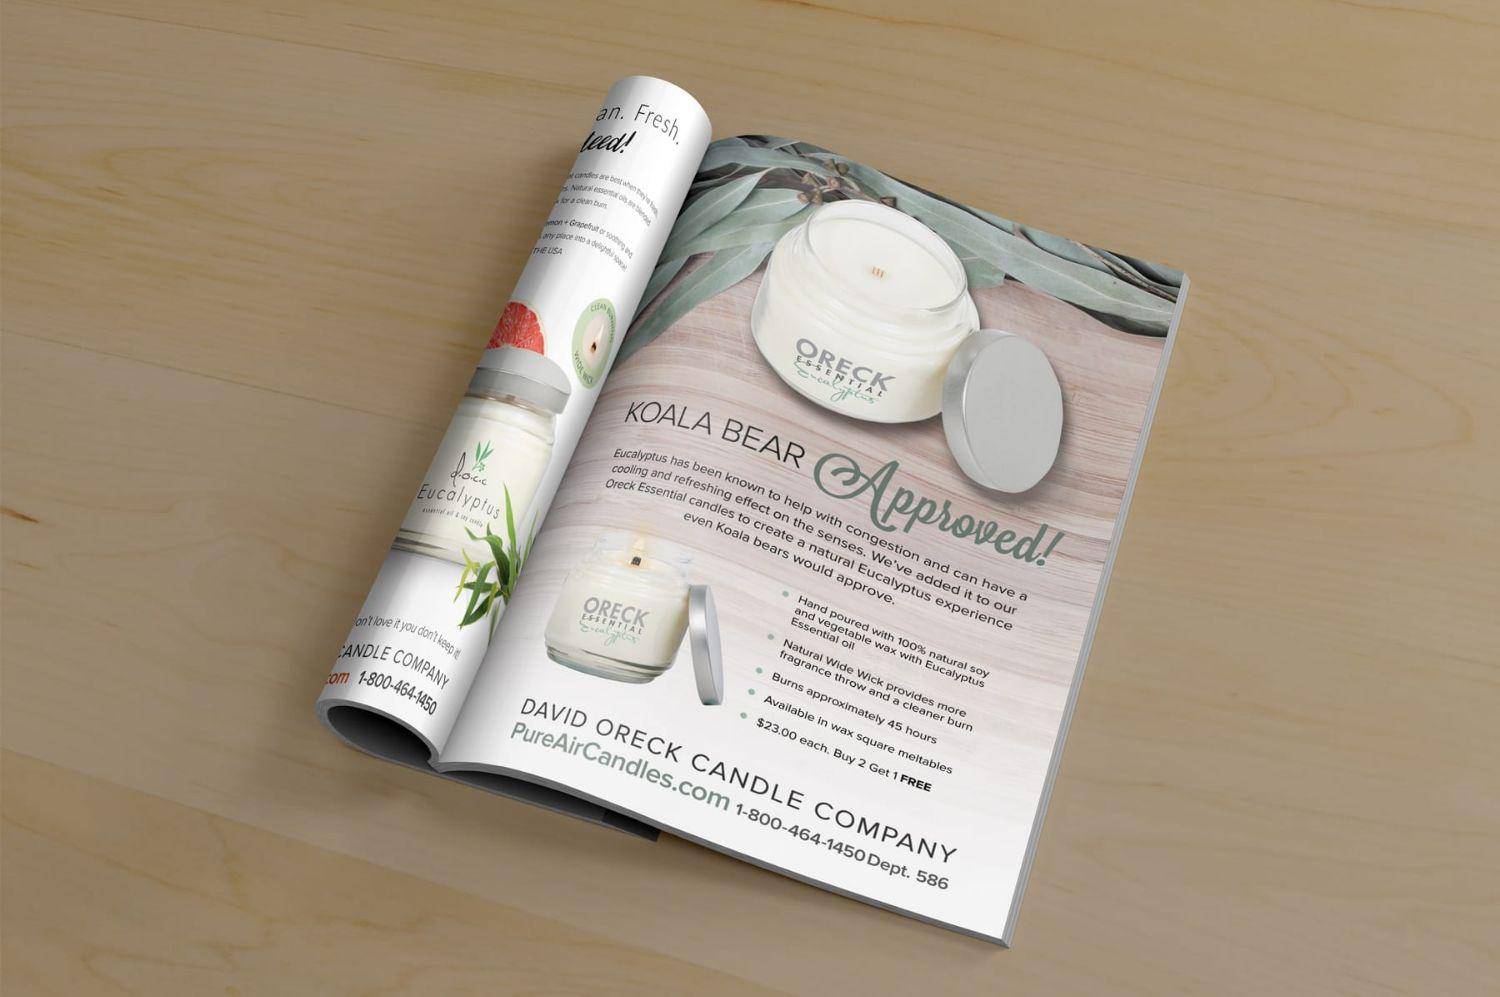 Oreck candles design in a magazine ad